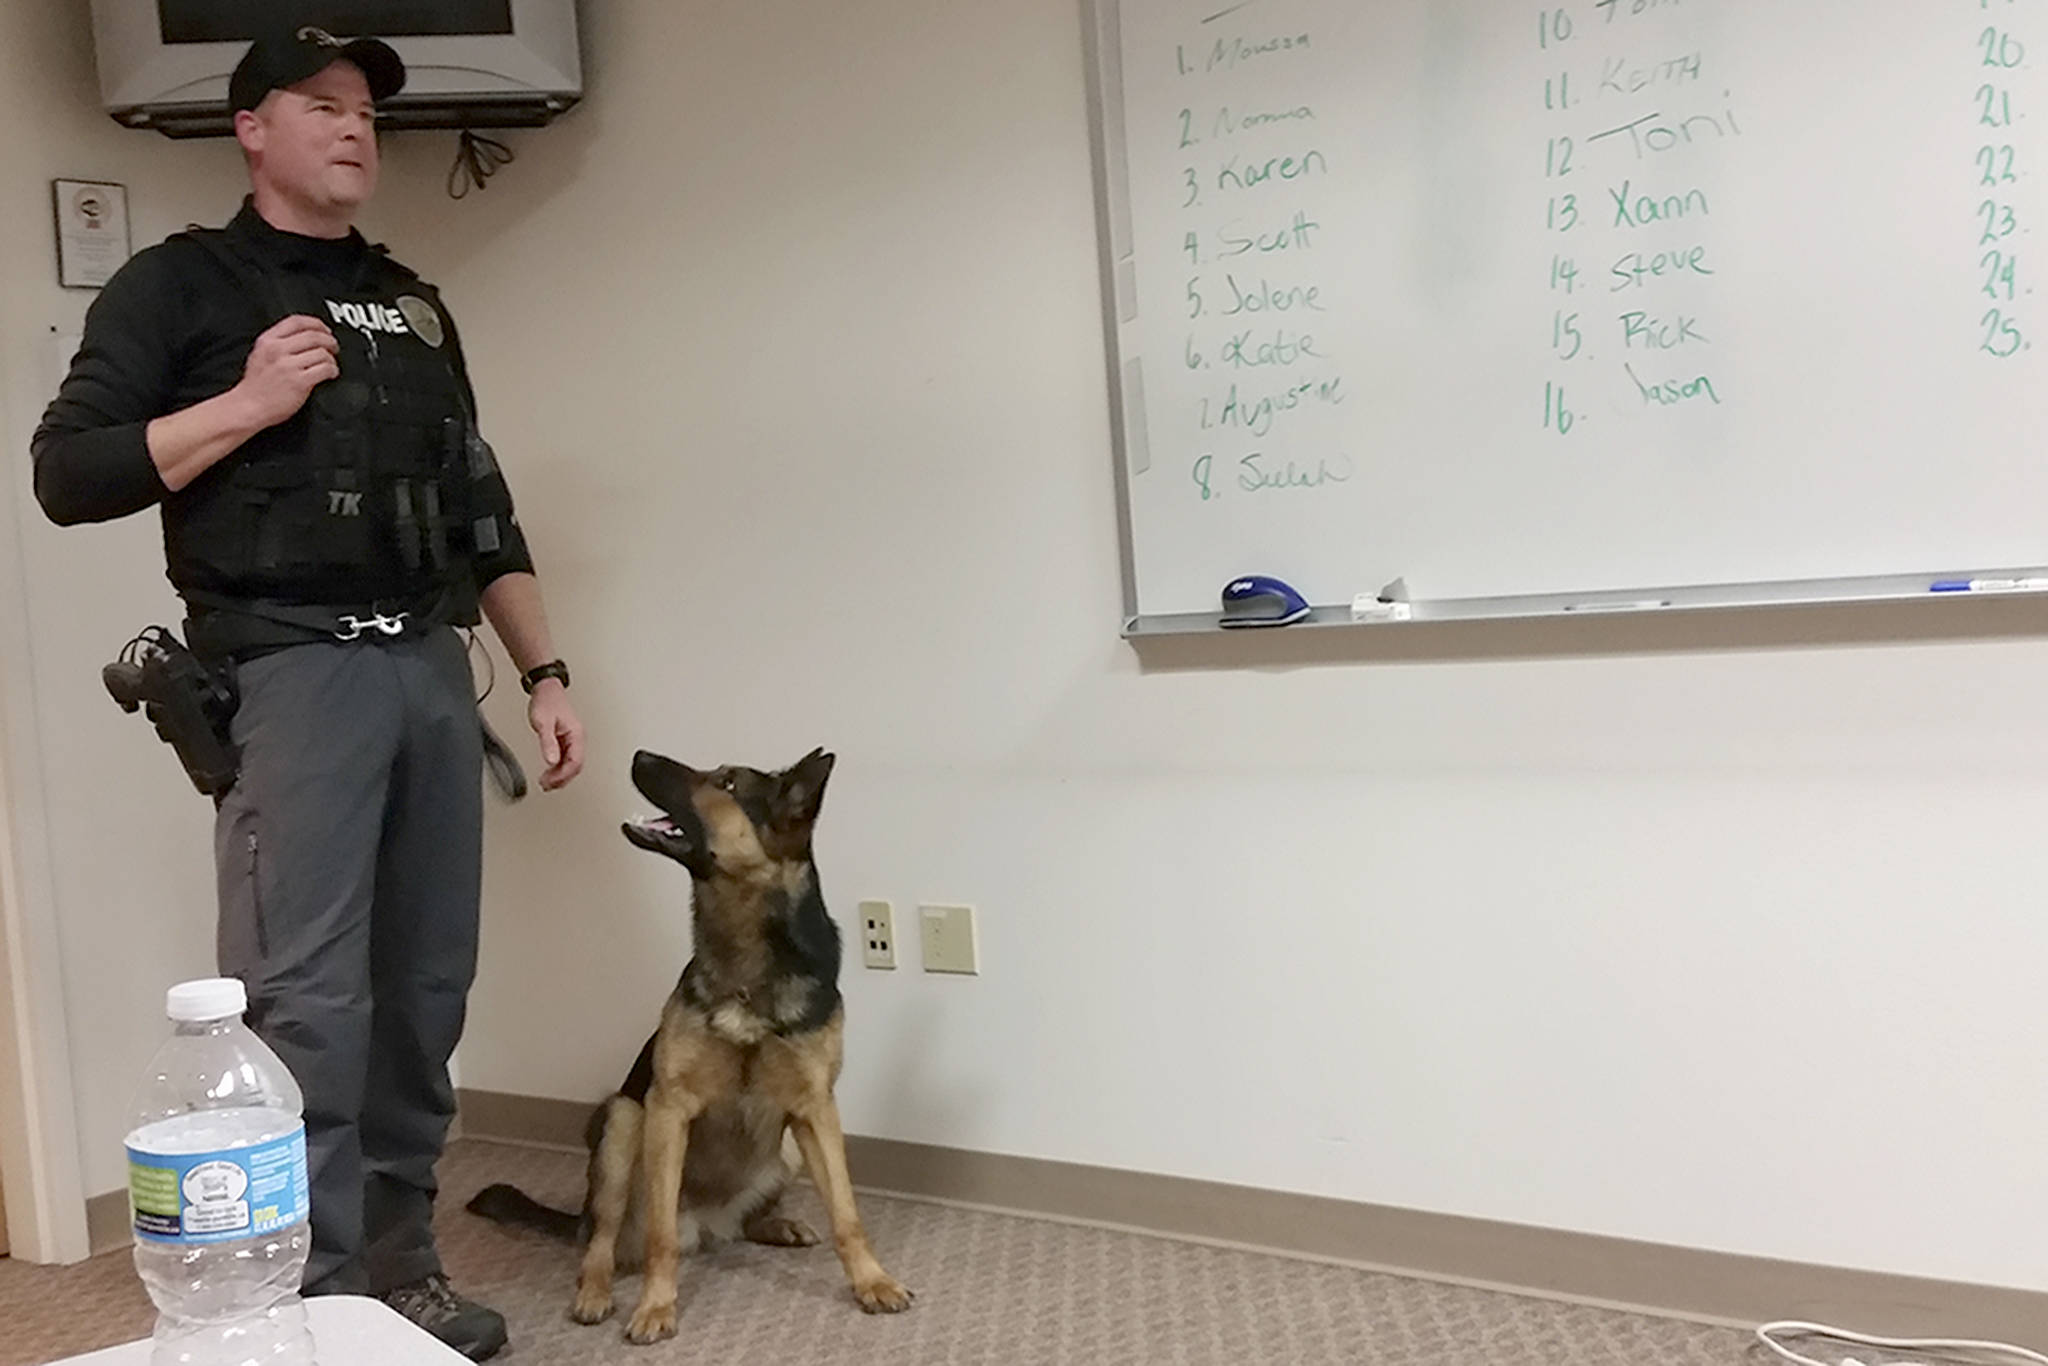 K-9 dogs must obey commands of their trainers